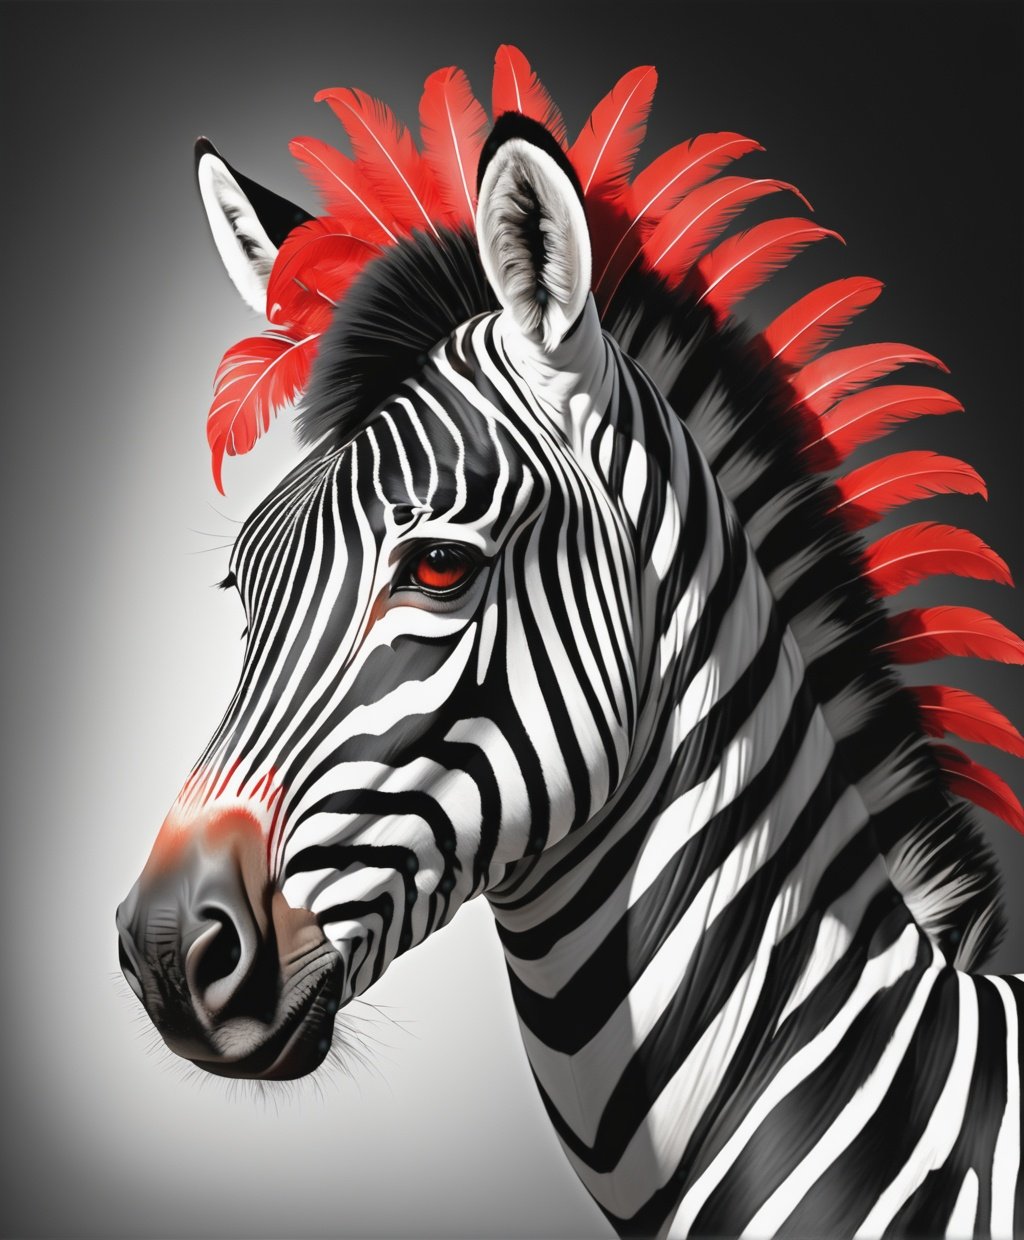 A black and white zebra with a bright red feather, Rembrandt Lighting, rococo style, 16k, high detail